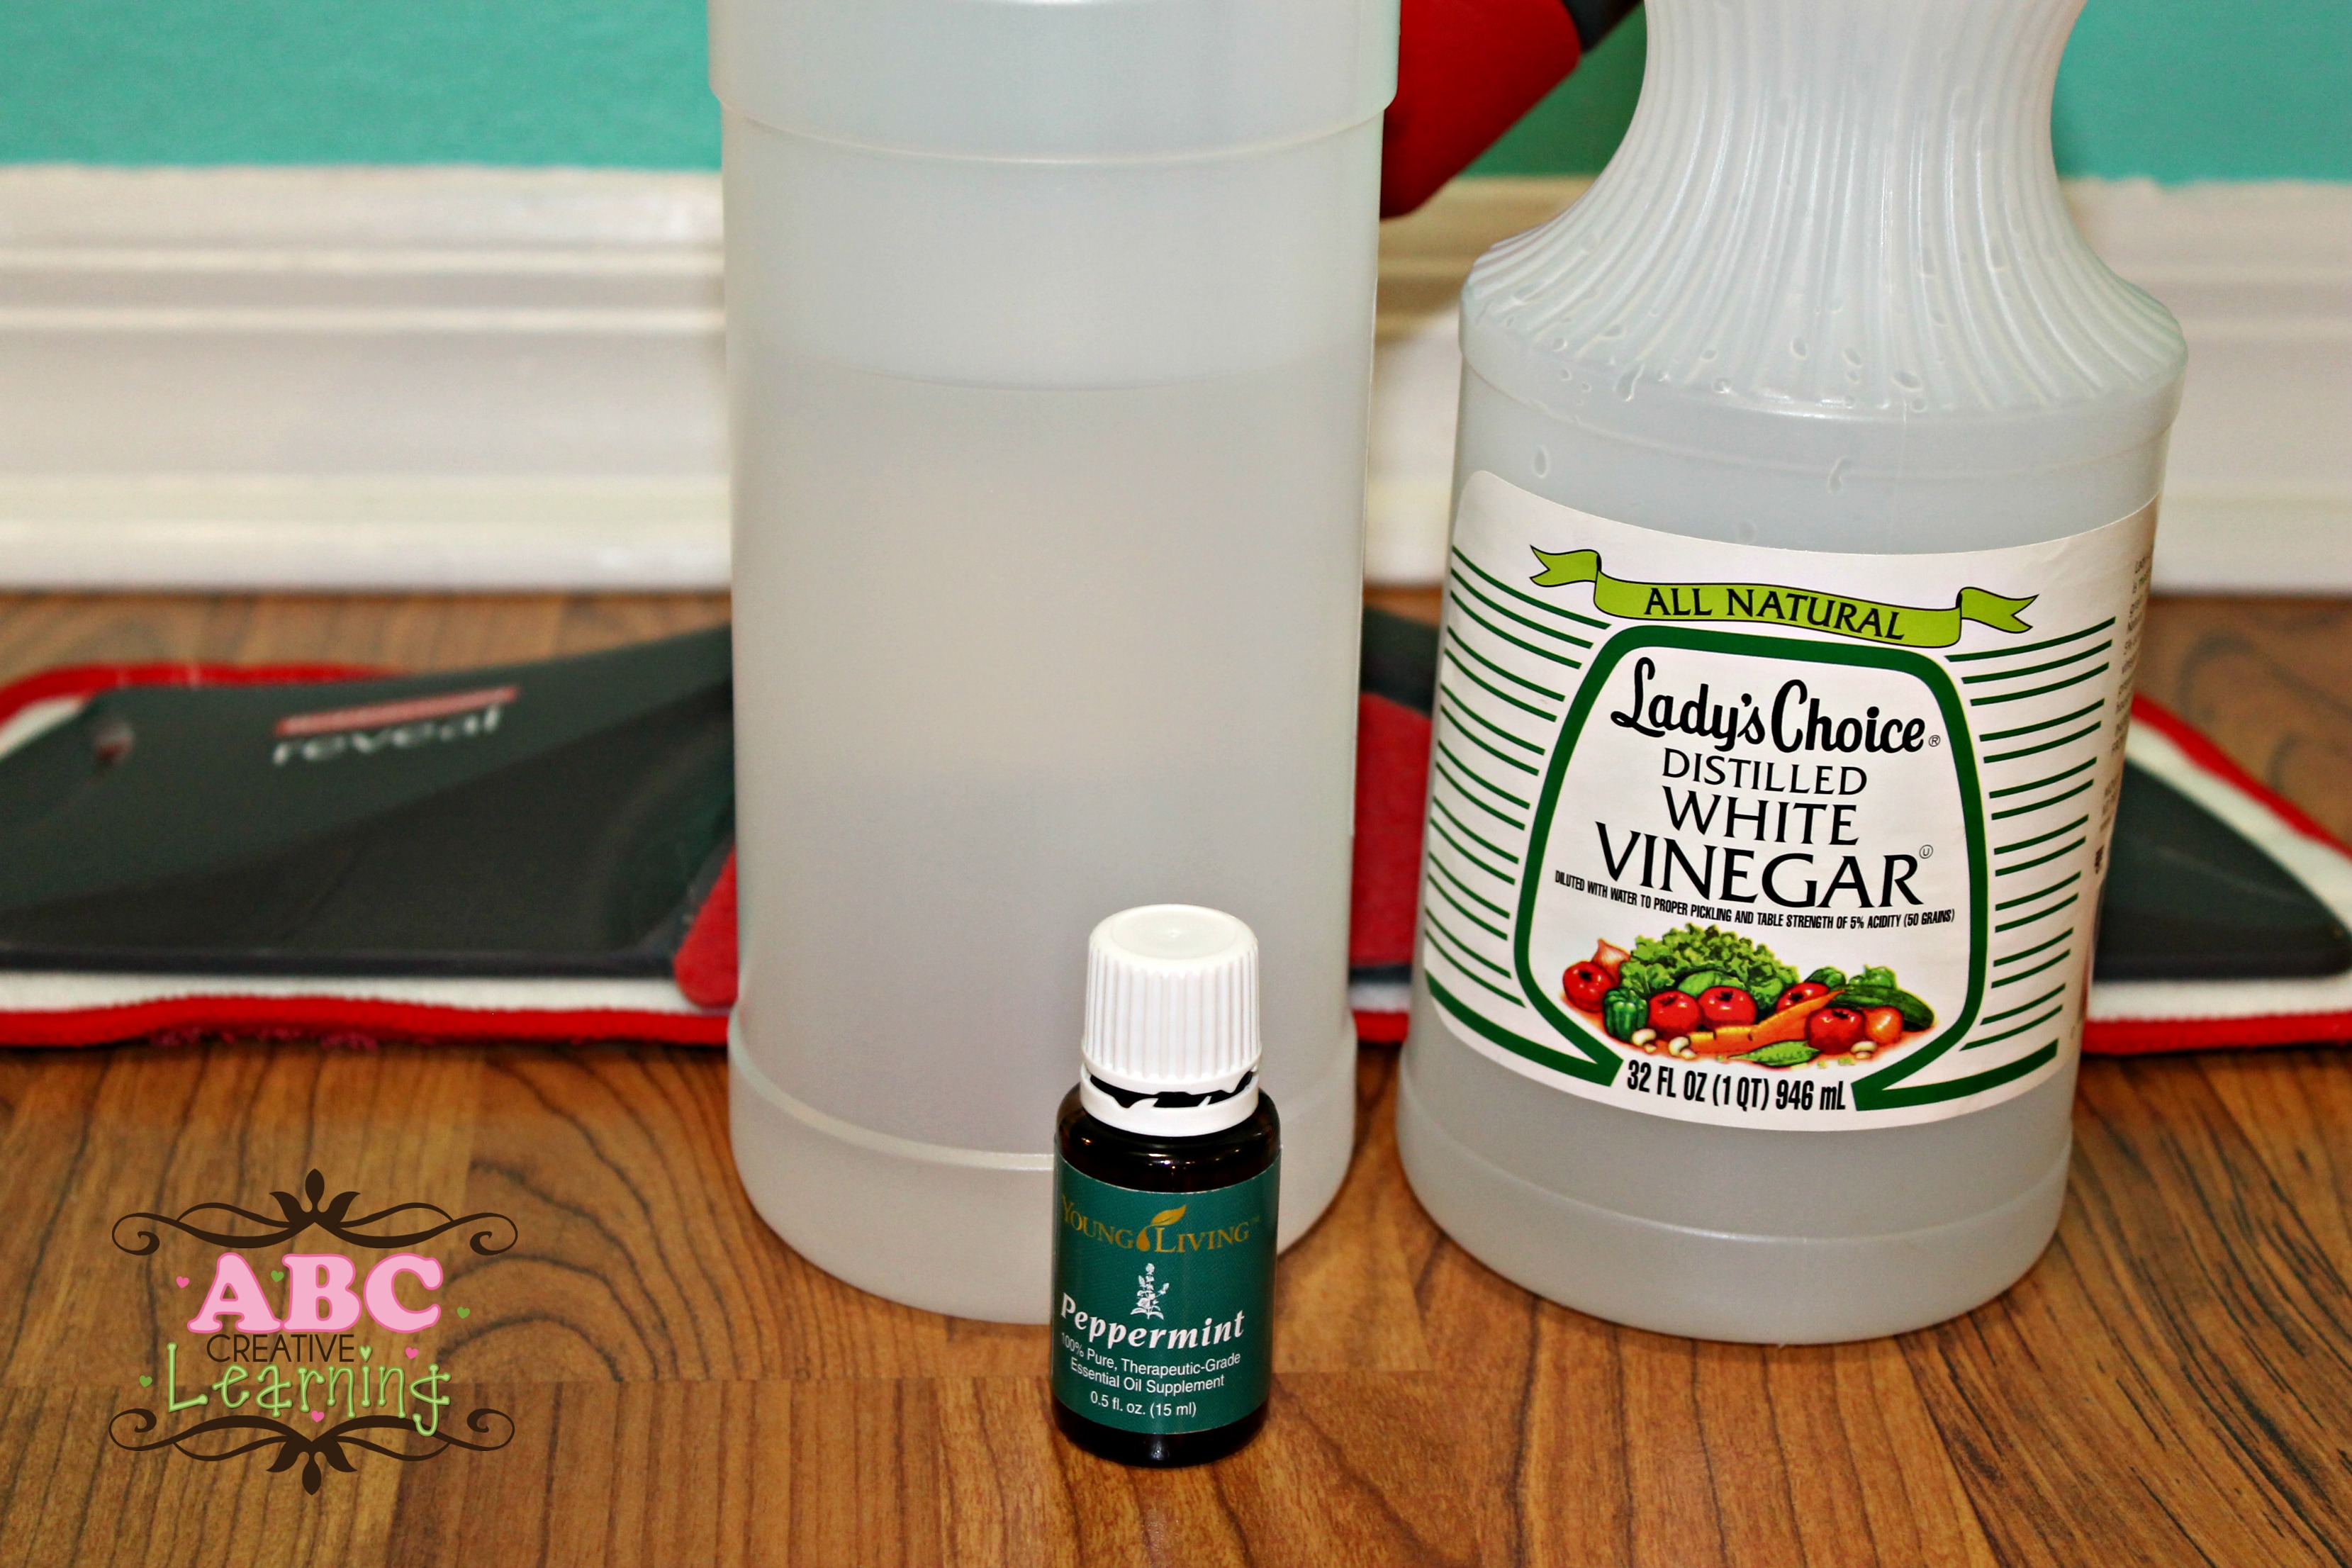 Mopping with Vinegar - Creative Homemaking